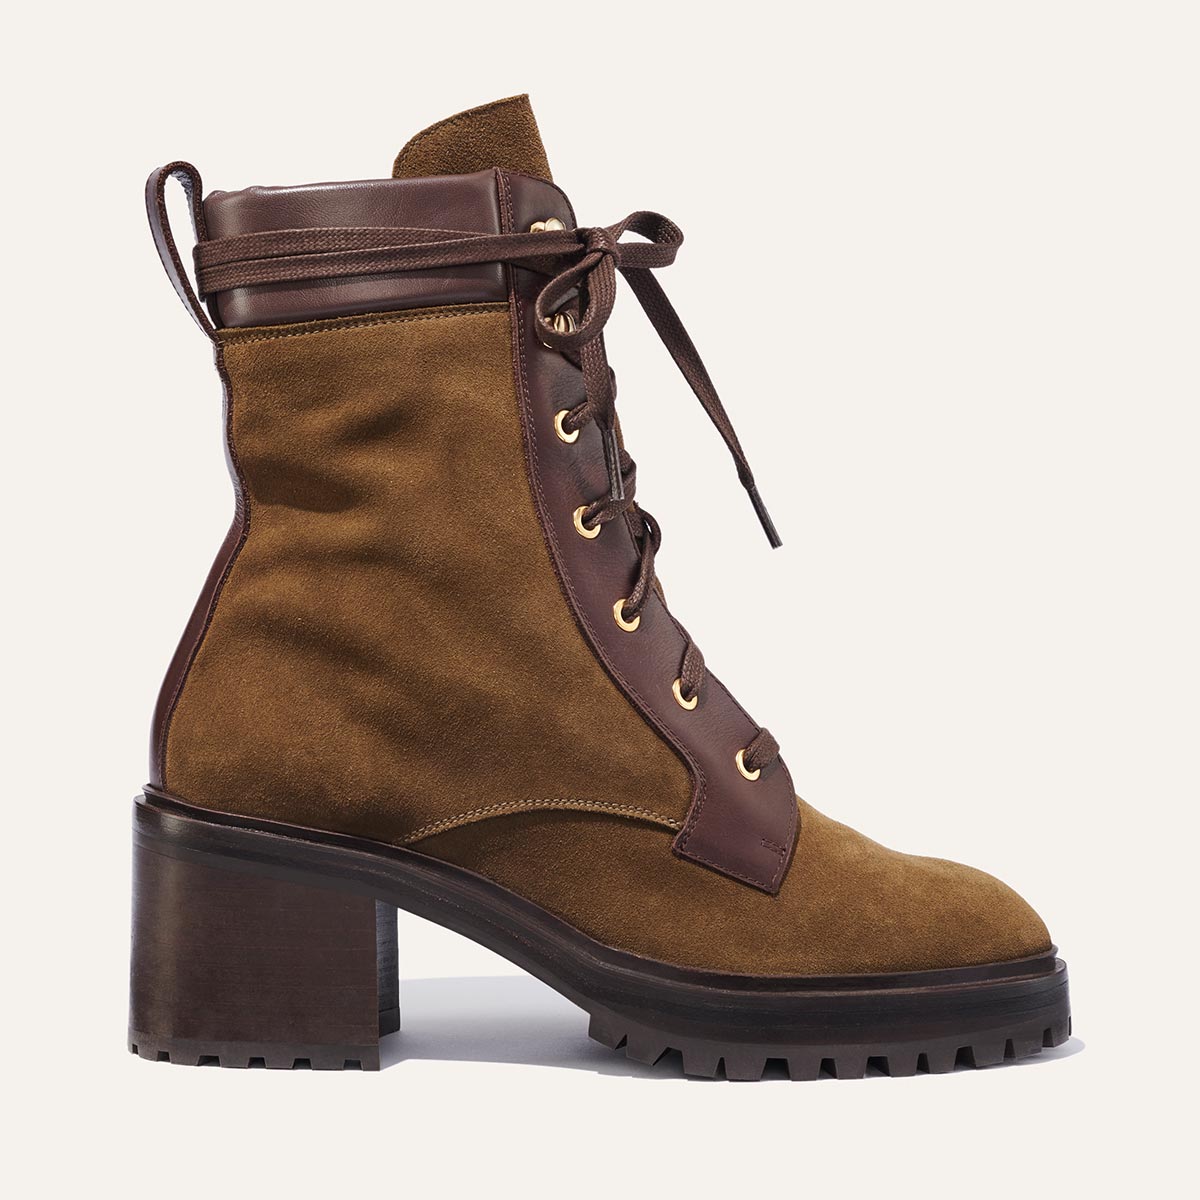 The Skater Boot - Moss Suede